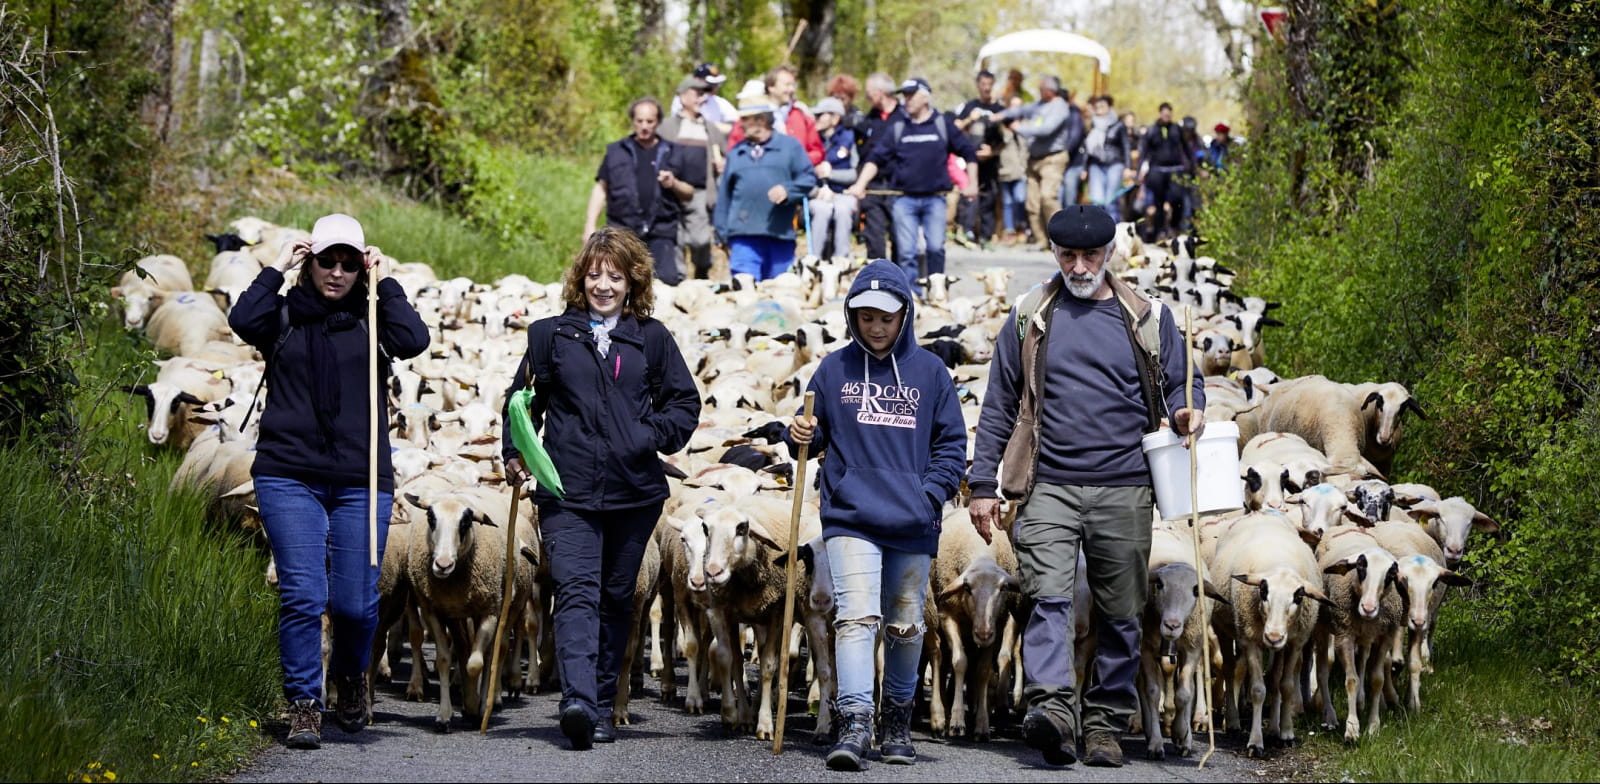 Transhumance from Luzech to Rocamadour